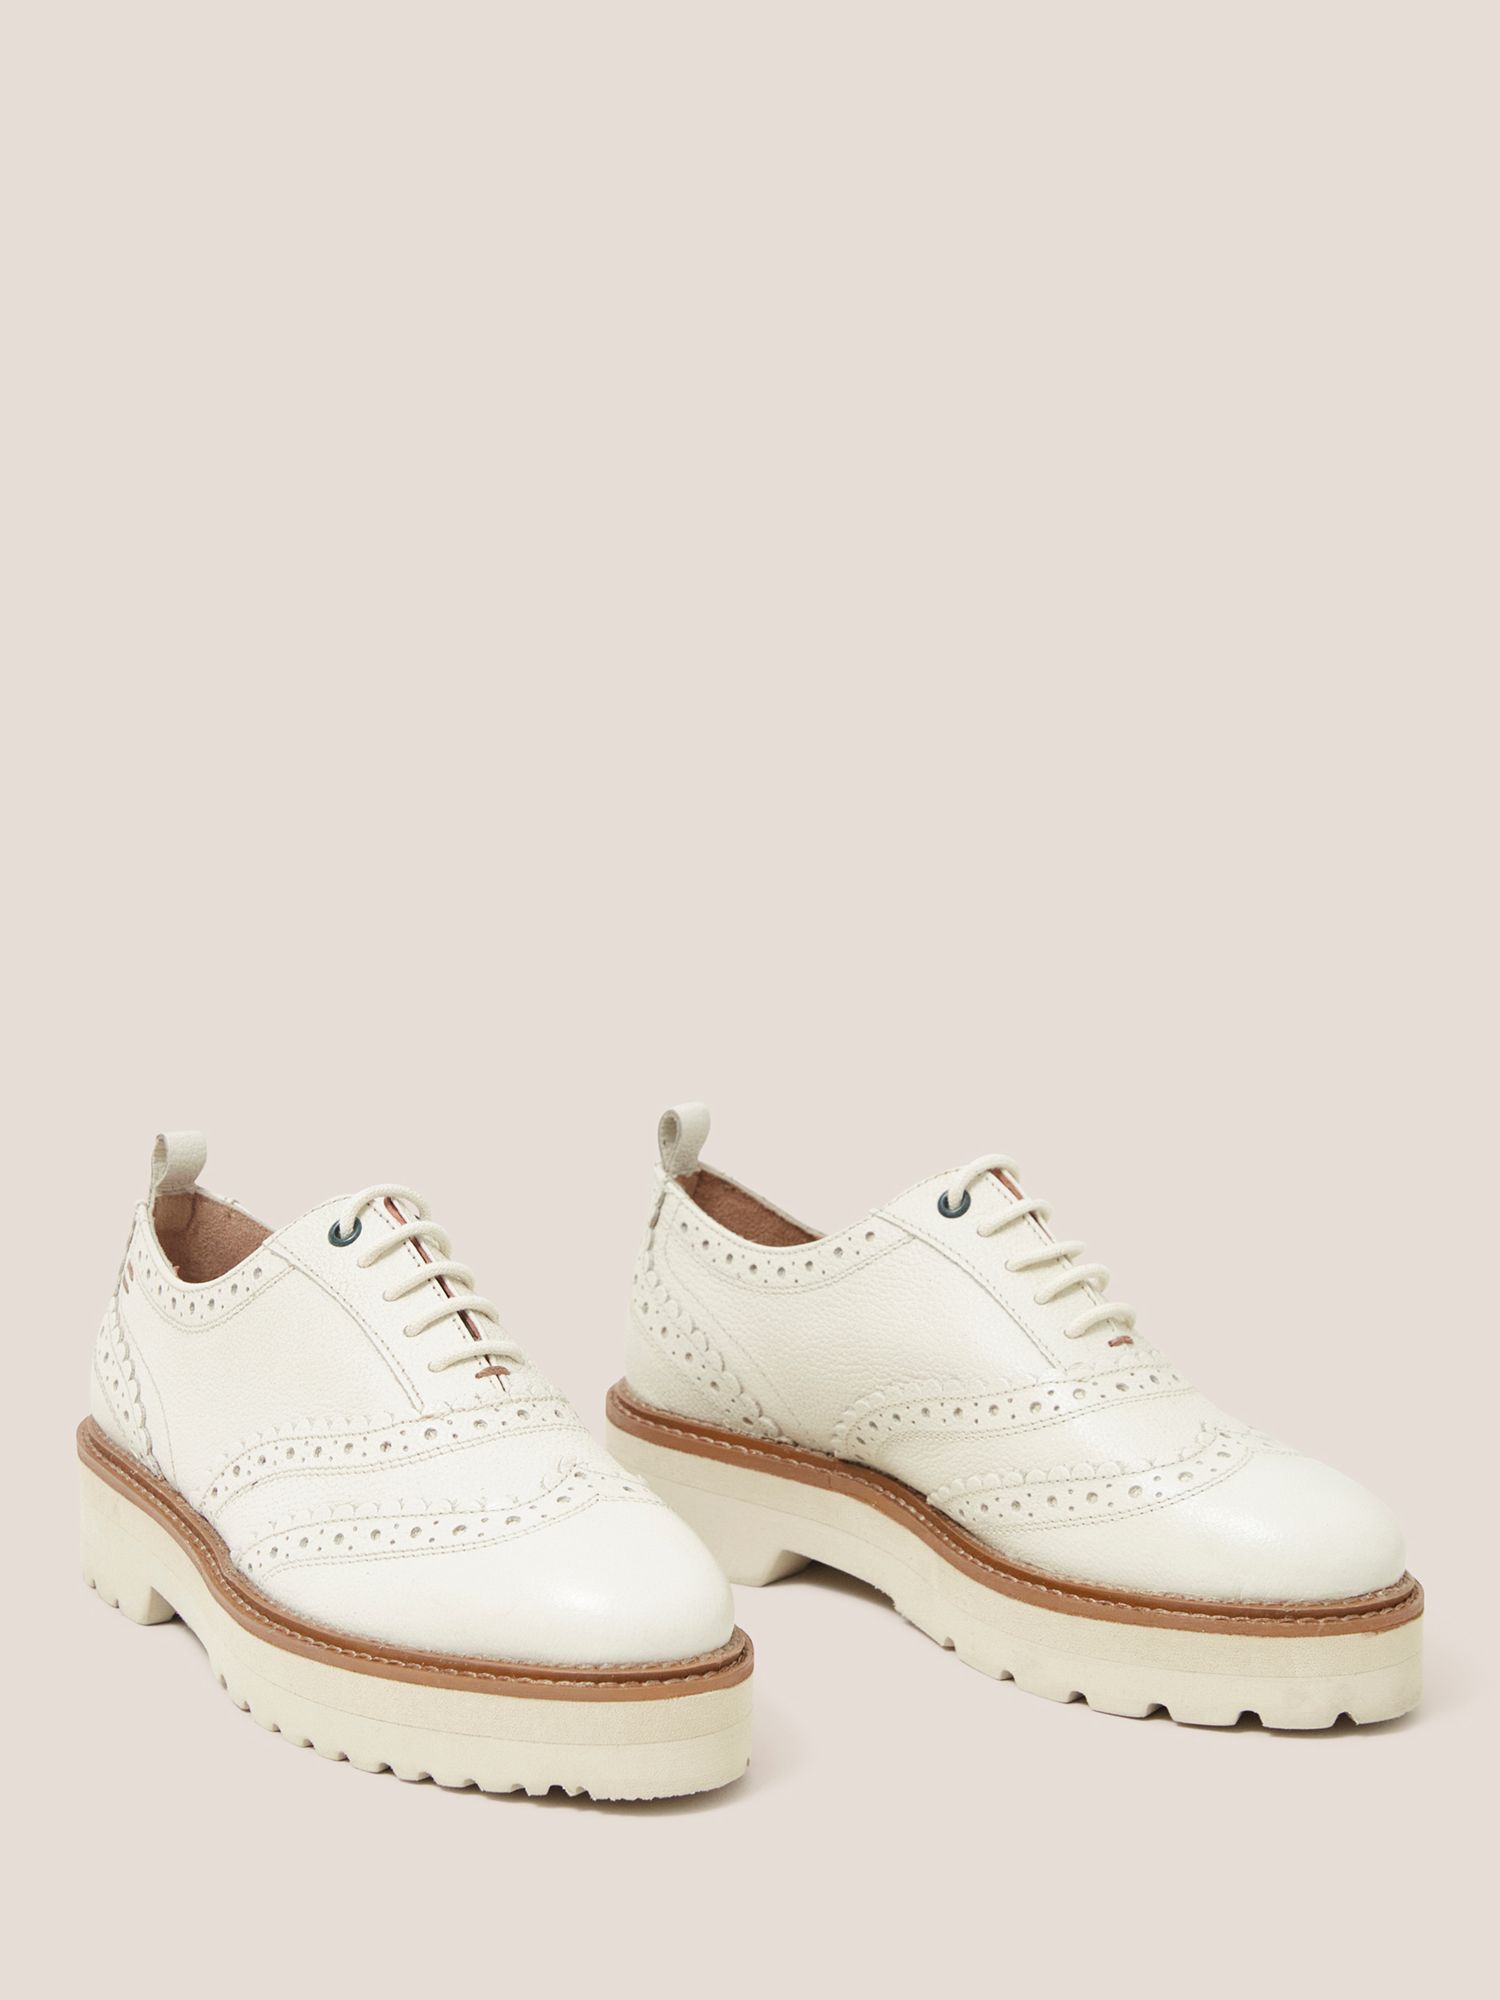 White Stuff Leather Lace Up Brogue Shoes, Lgt Nat at John Lewis & Partners